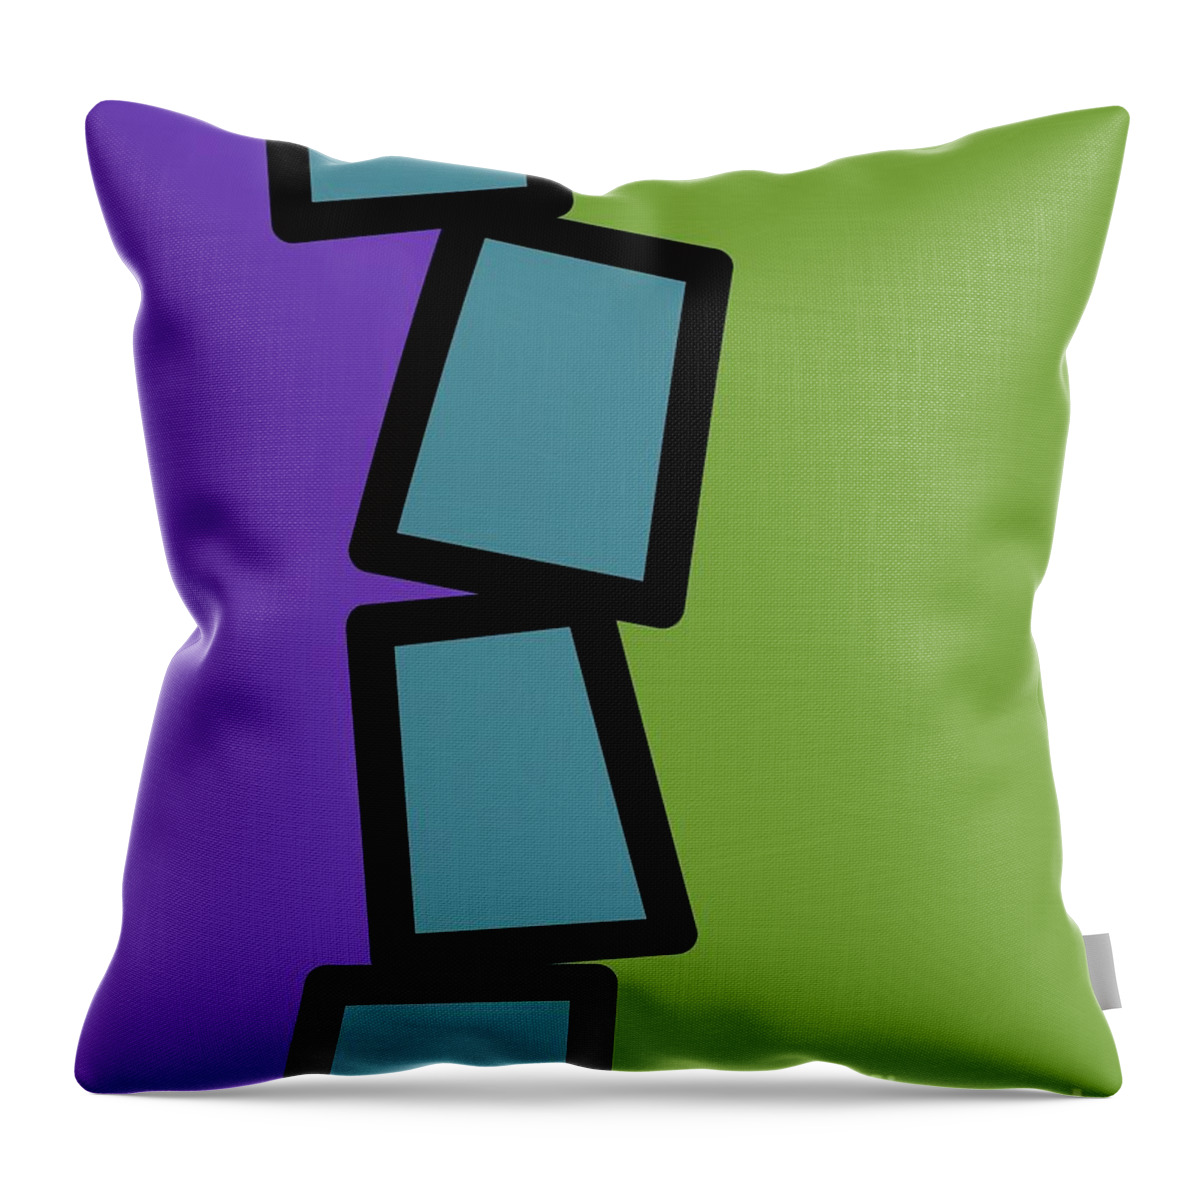 Retro Throw Pillow featuring the mixed media Retro Blue Rectangles 2 by Donna Mibus